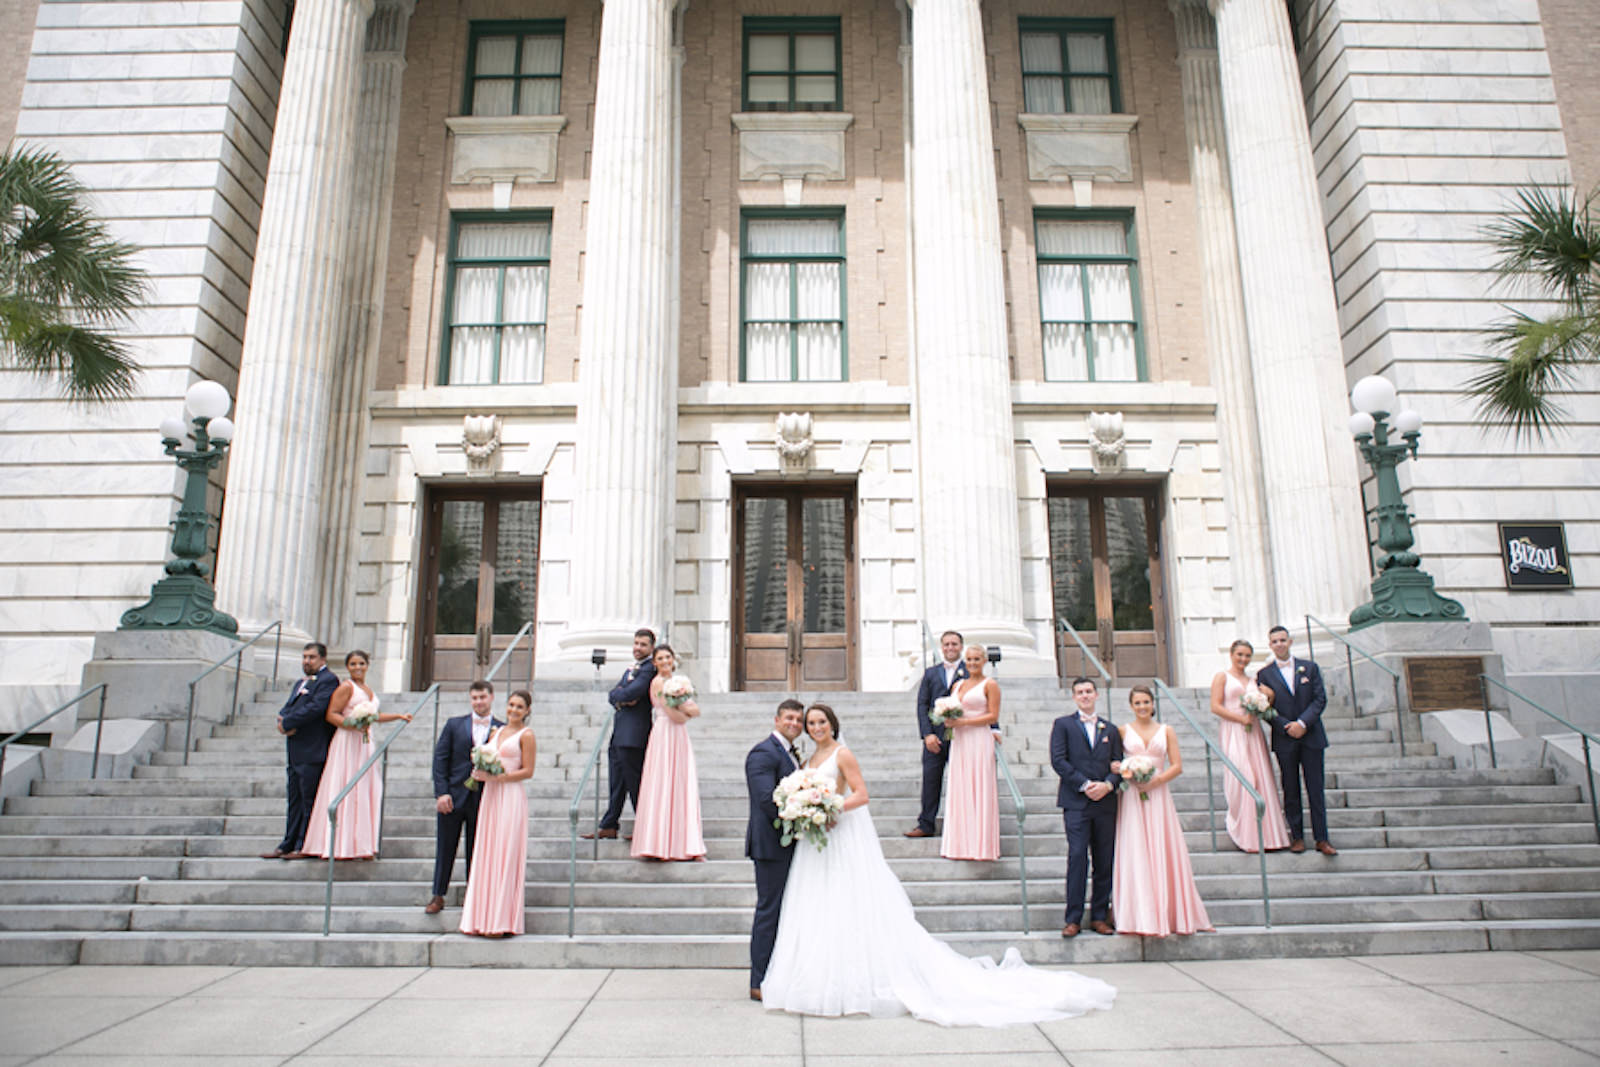 Outdoor Downtown Tampa Bride and Groom Wedding Party Portrait at Traditional Catholic Ceremony Cathedral Church Staircase | V Neck Illusion Lace A Line Ballgown Wedding Dress with Rhinestone Waist Band and Cathedral Veil | Groom and Groomsmen in Classic Navy Blue Suit with Bow Tie | Blush Pink and Ivory Roses and Peonies Bridal Bouquet with Eucalyptus Greenery | Blush Pink Long Formal Silk Satin Bridesmaid Dresses